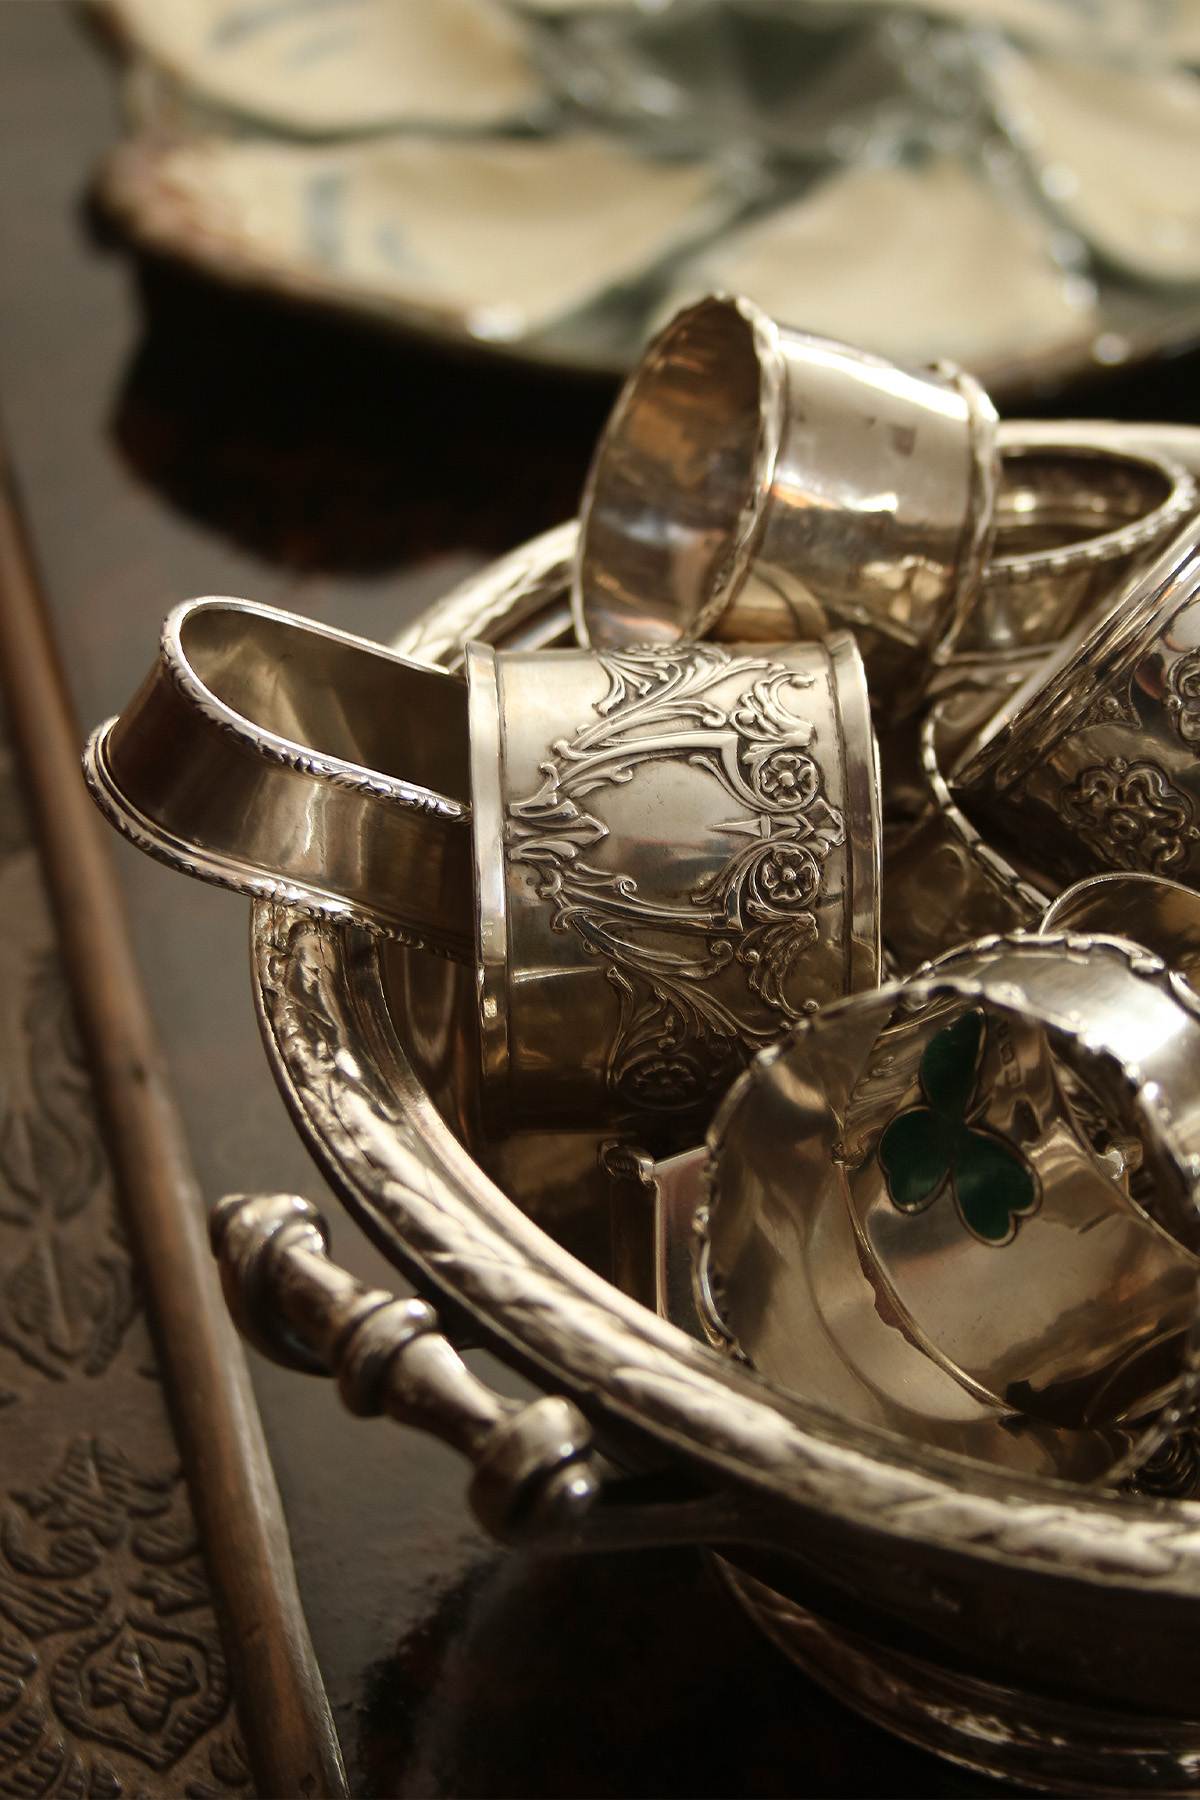 Pam Kelley of Pam Kelley Design's collection of antique silver napkin rings